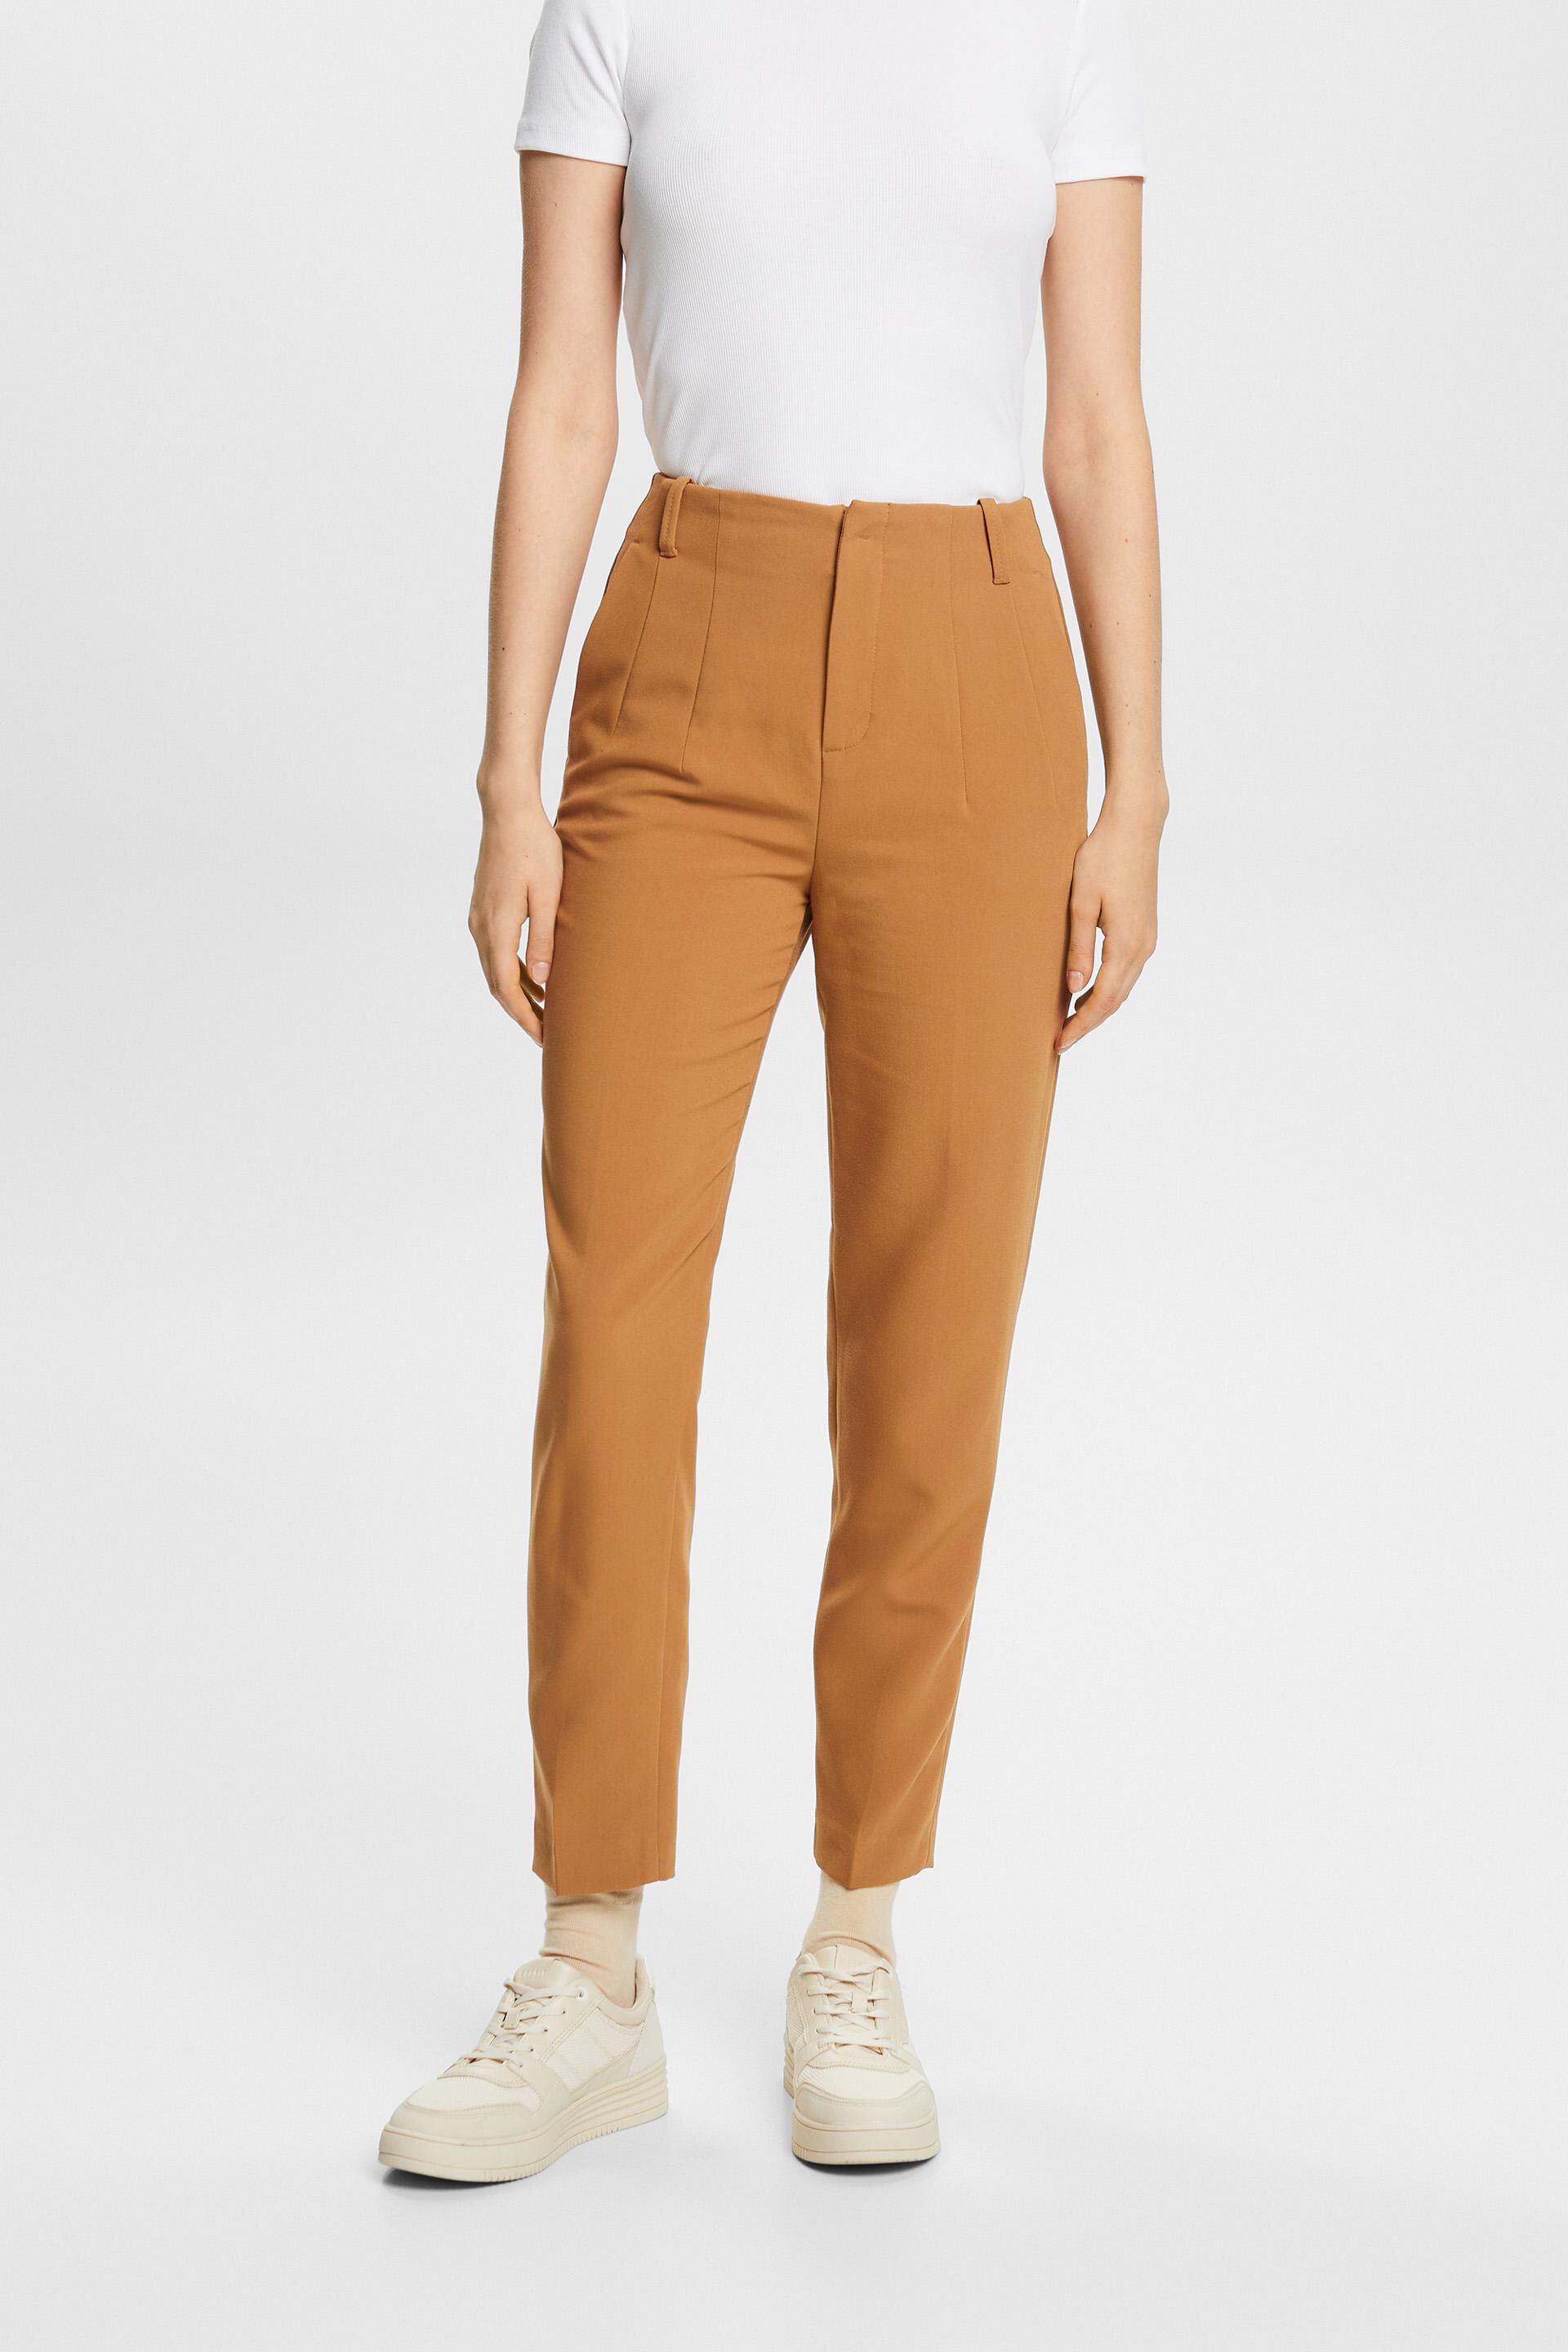 Esprit chino darts with High waisted